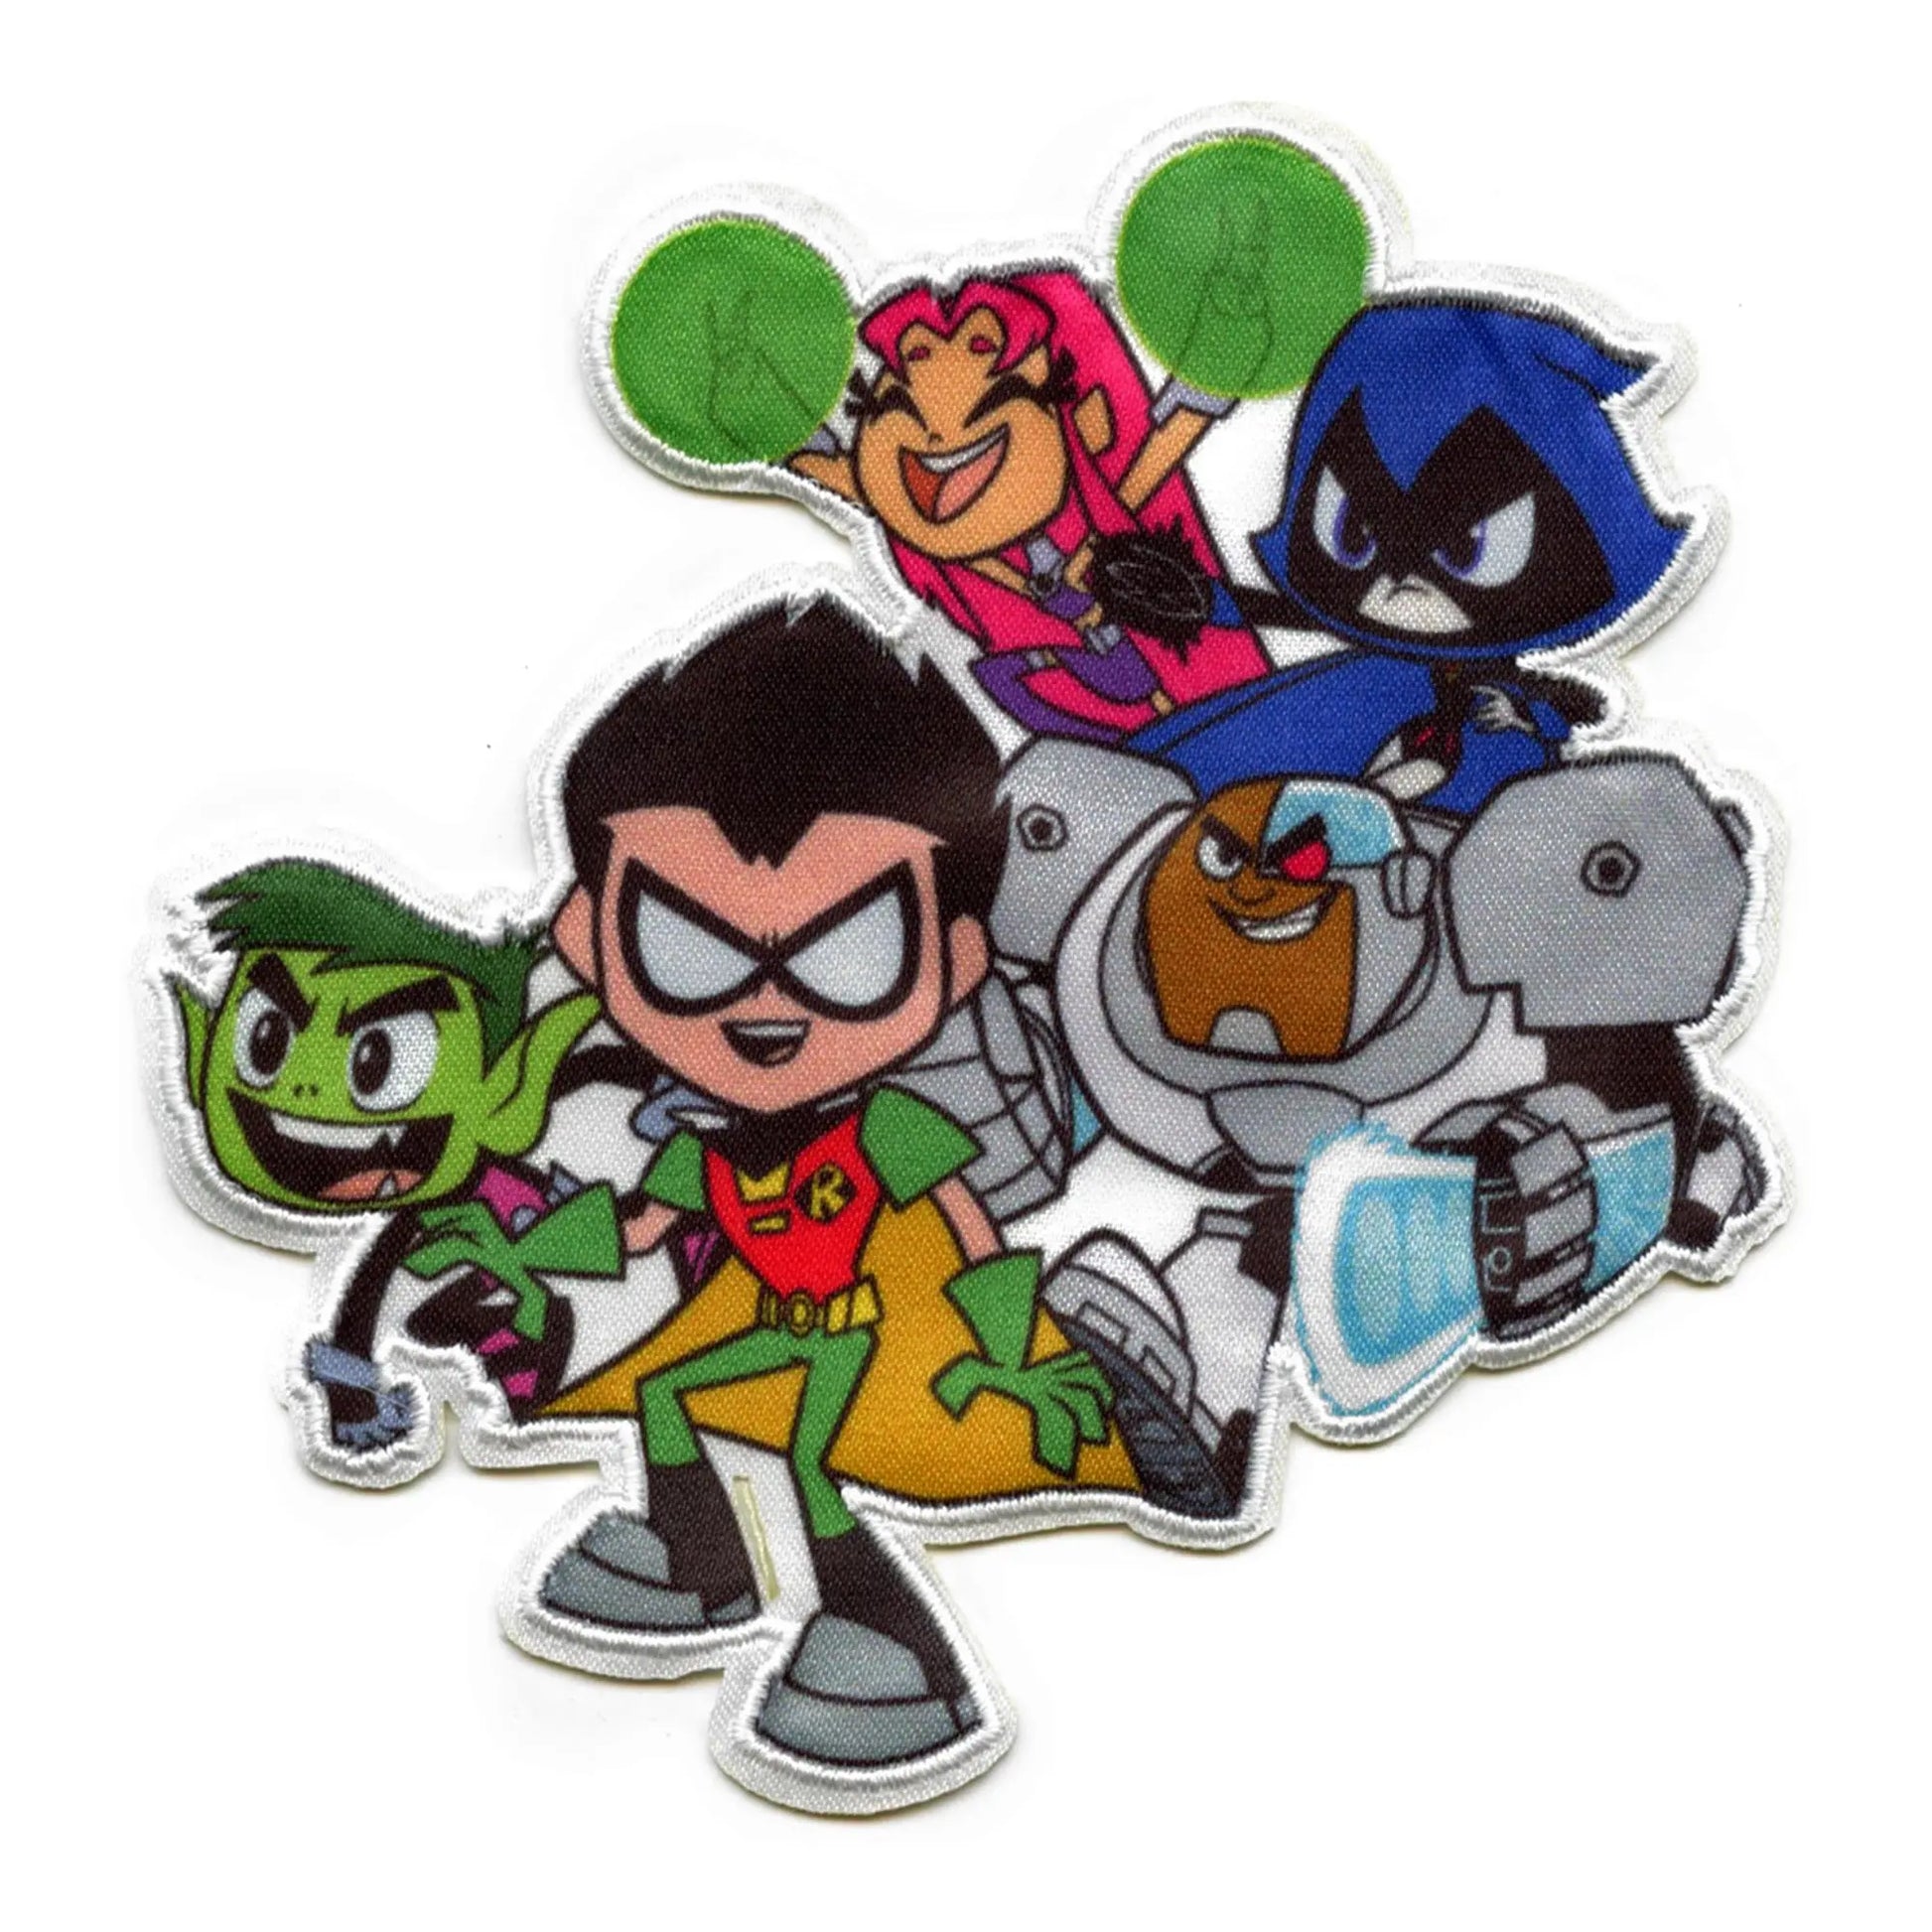 Teen Titans Go! Full Group Patch DC Cartoon Network Embroidered Iron On